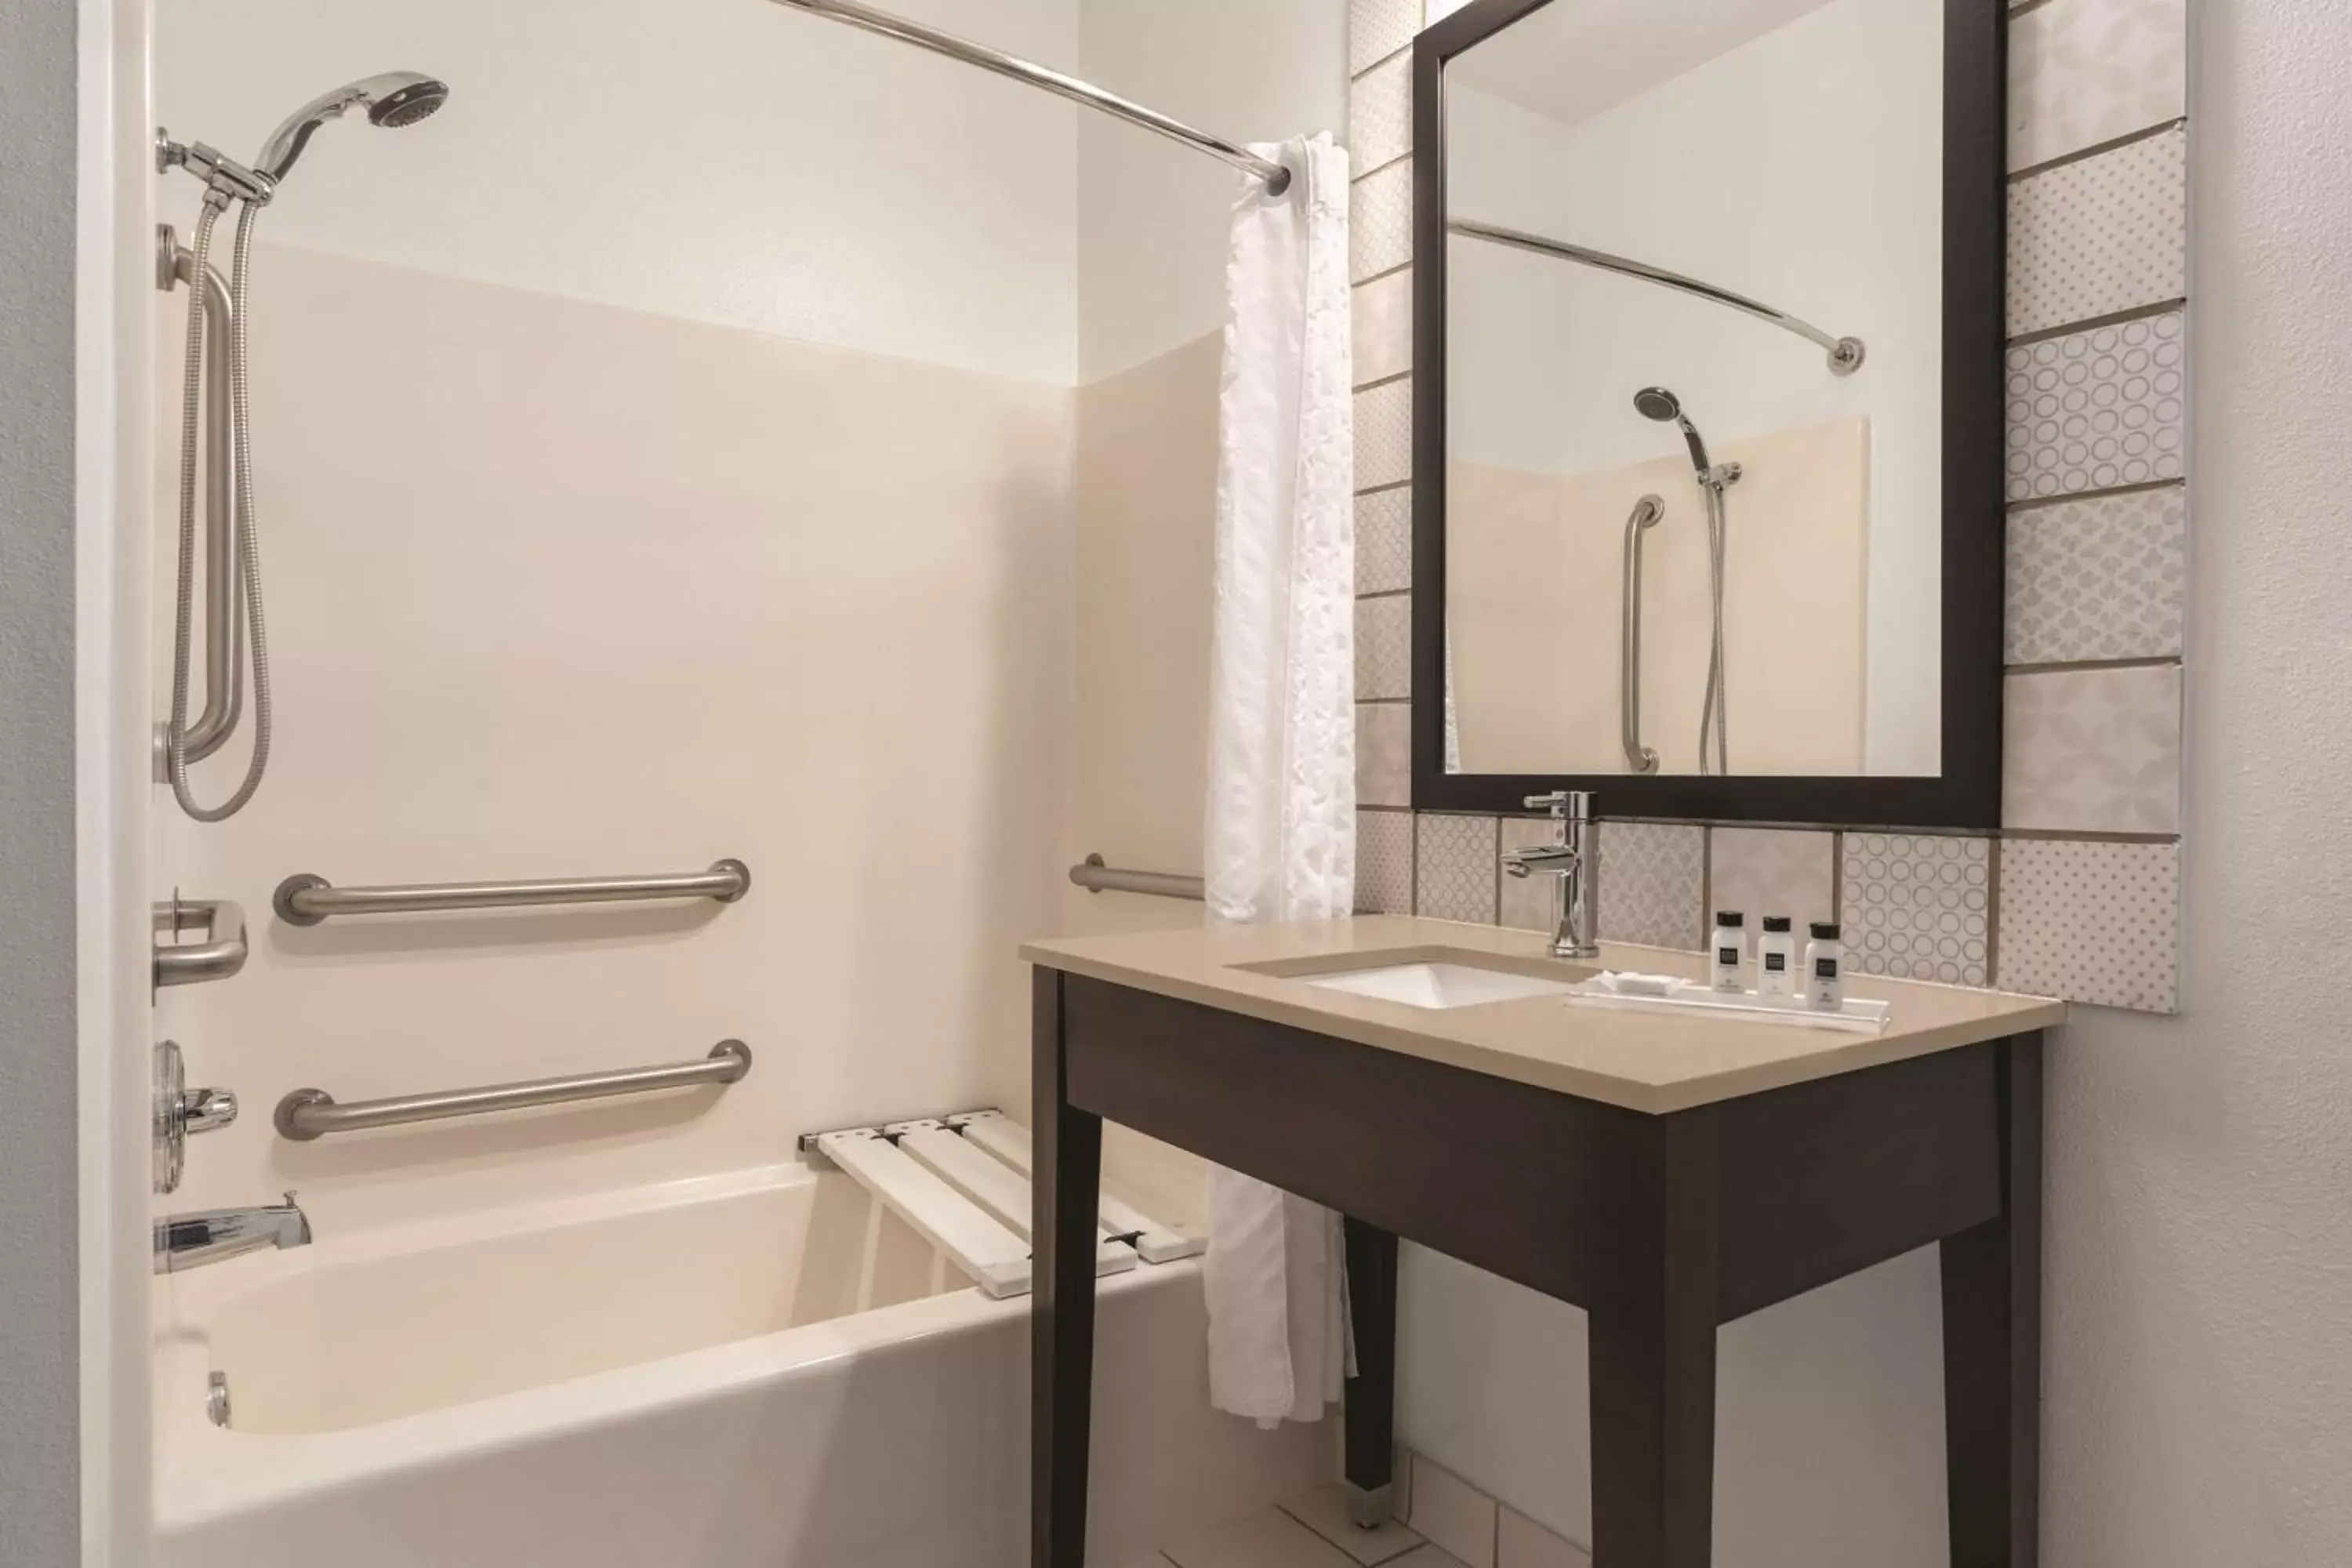 Bathroom in Country Inn & Suites by Radisson, Big Flats (Elmira), NY